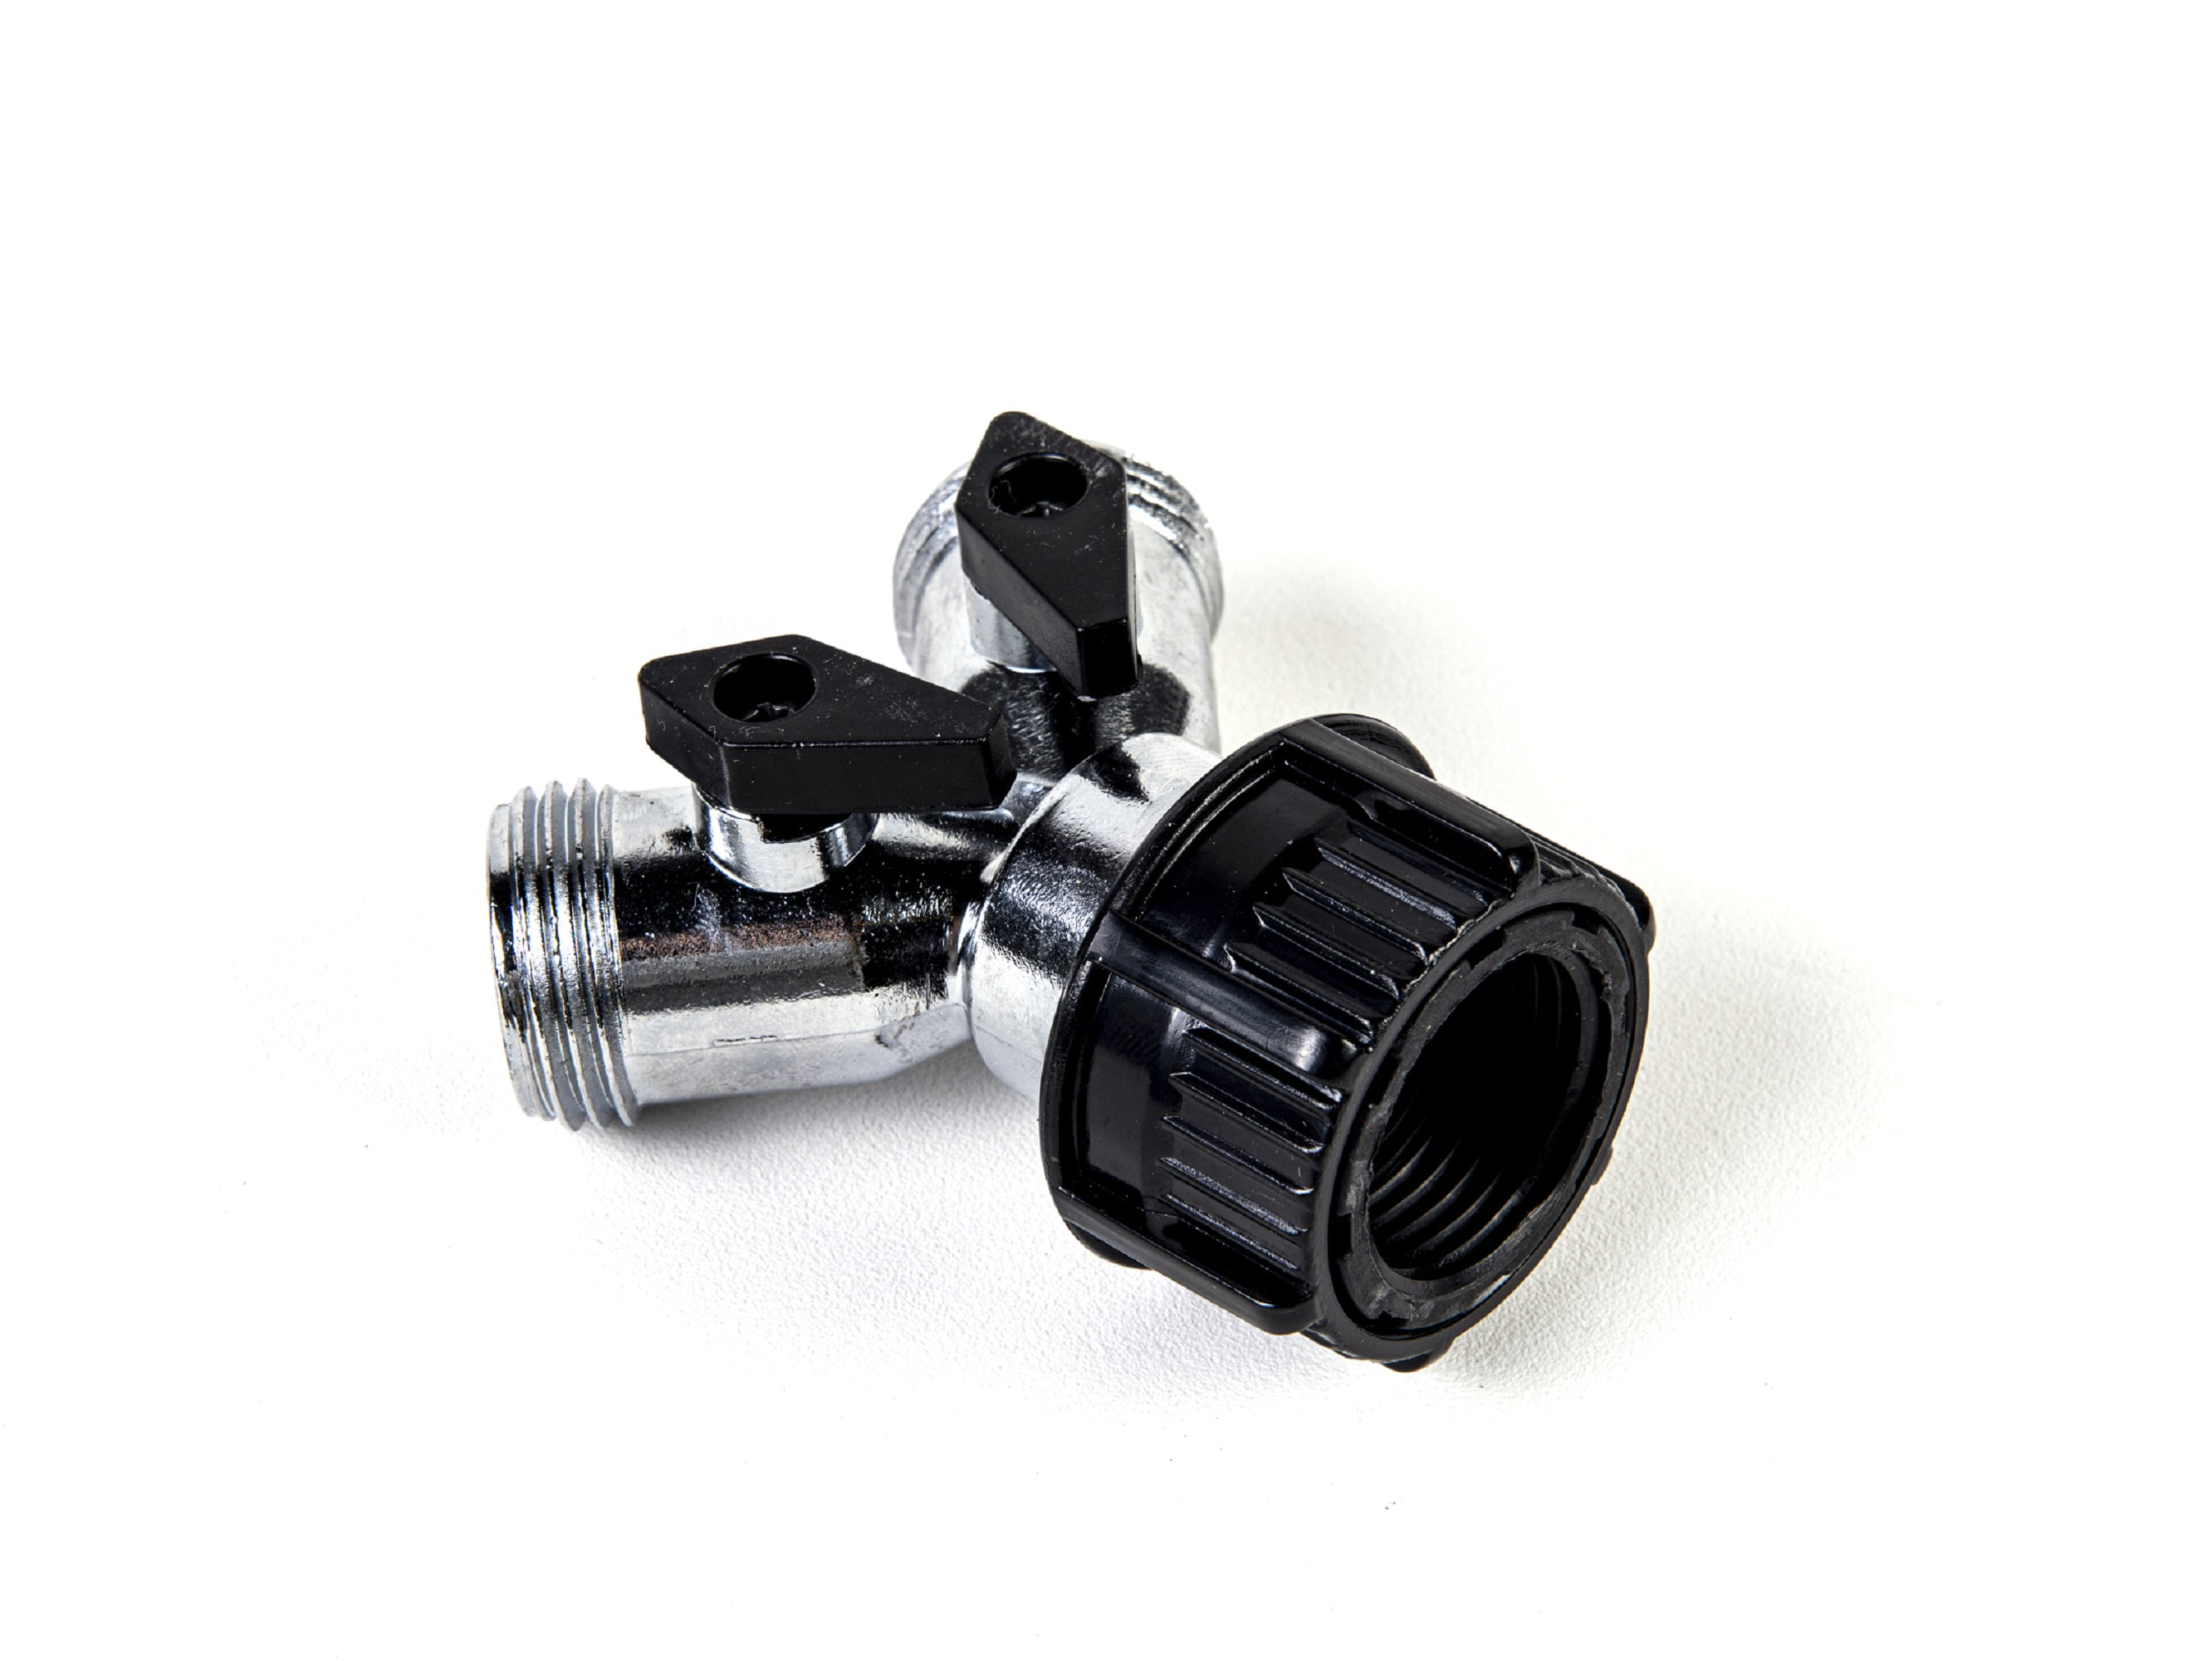 tap or male adapter connection. two-way shut off hose adapter garden hosepipe 